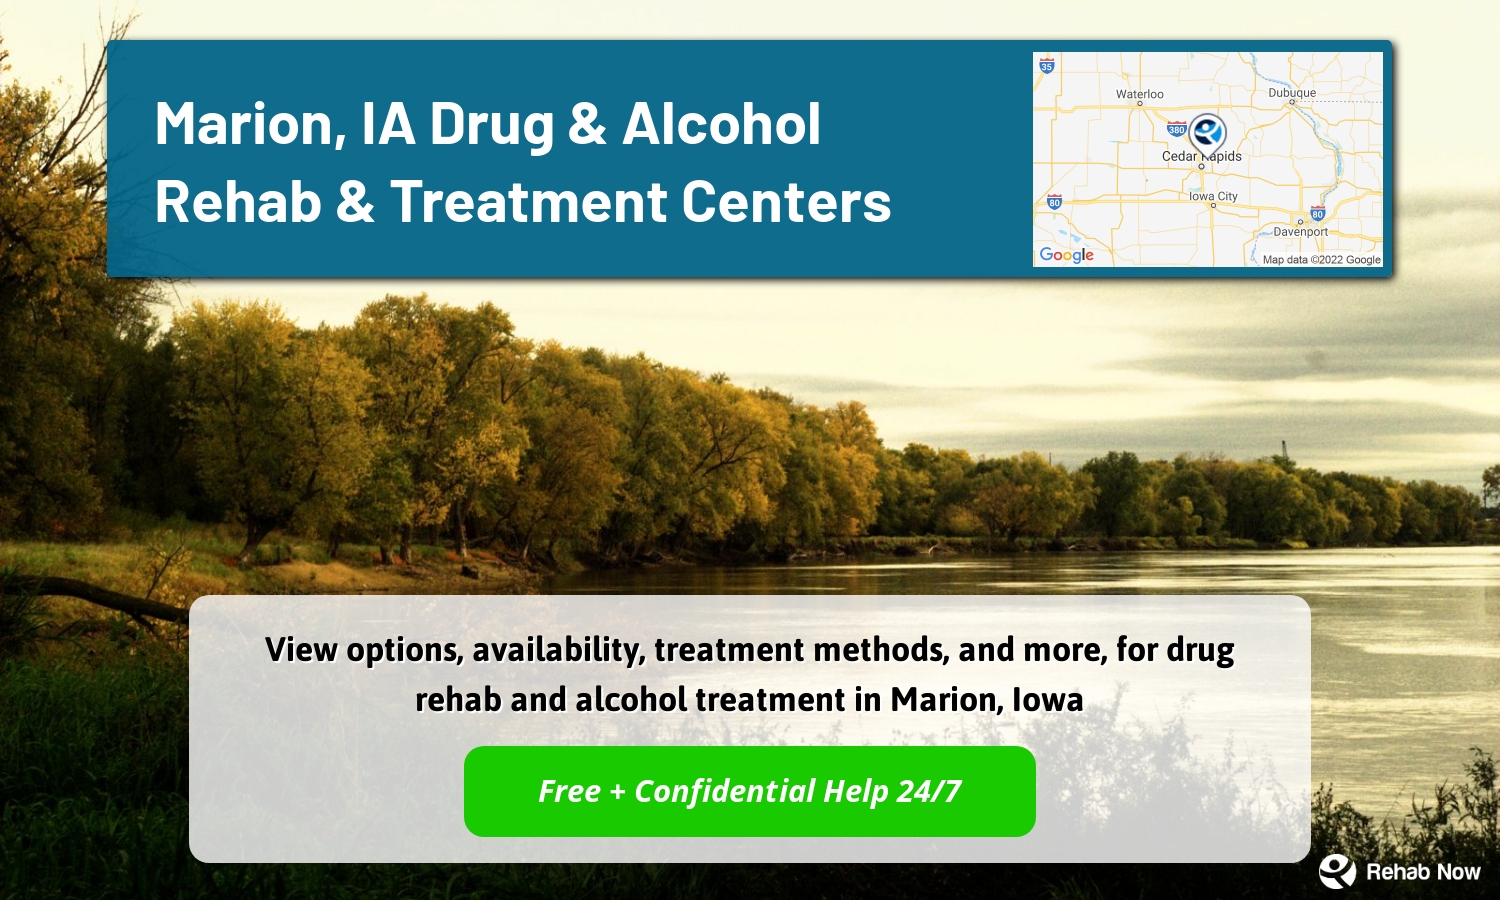 View options, availability, treatment methods, and more, for drug rehab and alcohol treatment in Marion, Iowa